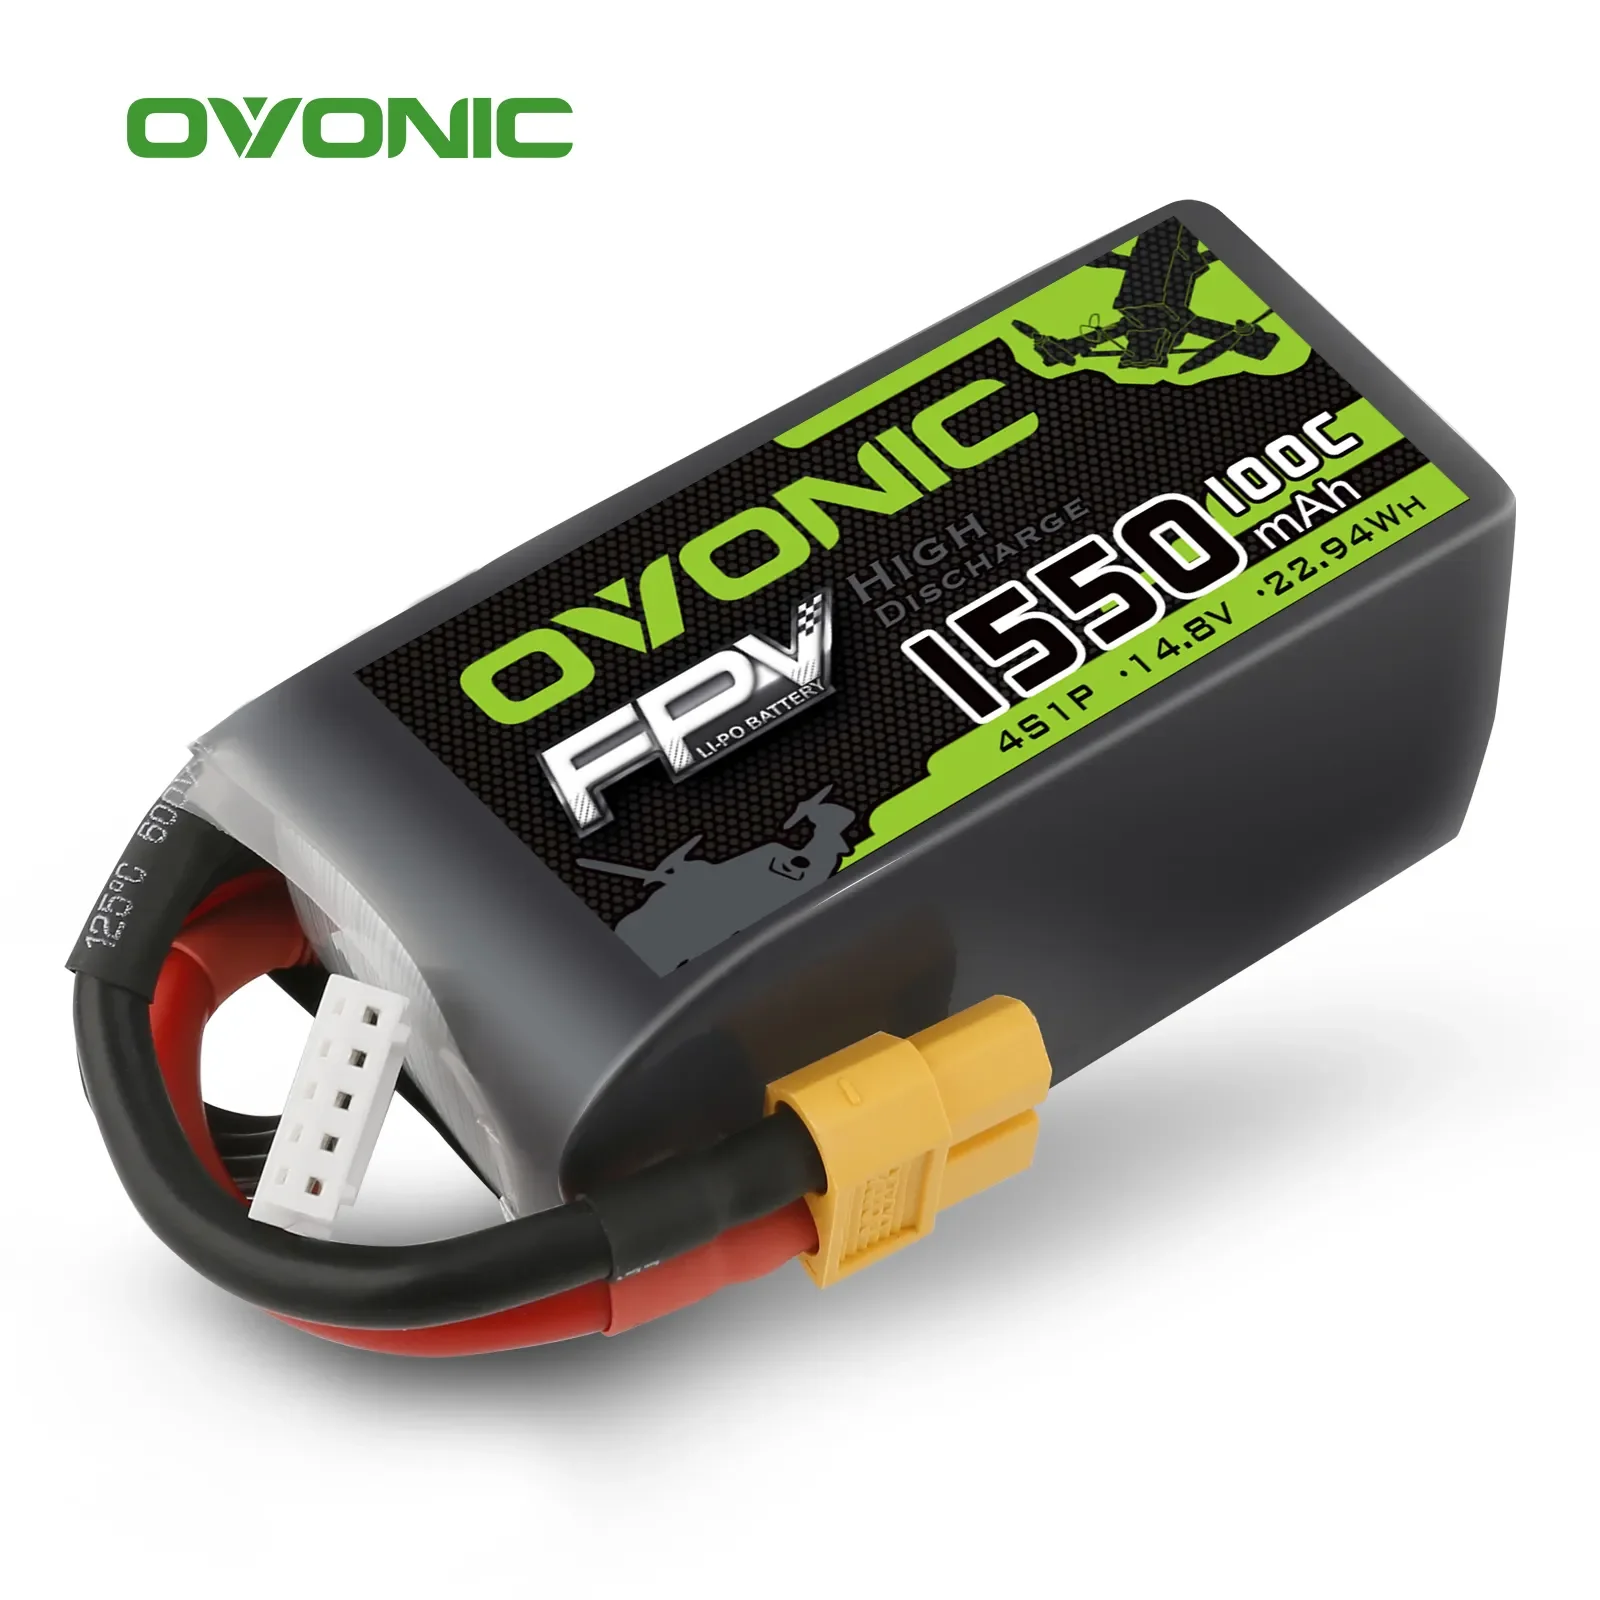 

OVONIC 6s 4s Lipo 4s Battery 1300mAh Racing Drone 100C 22.2V XT60 Plug For RC Quadcopter Helicopter UAV Aircraft Batteries